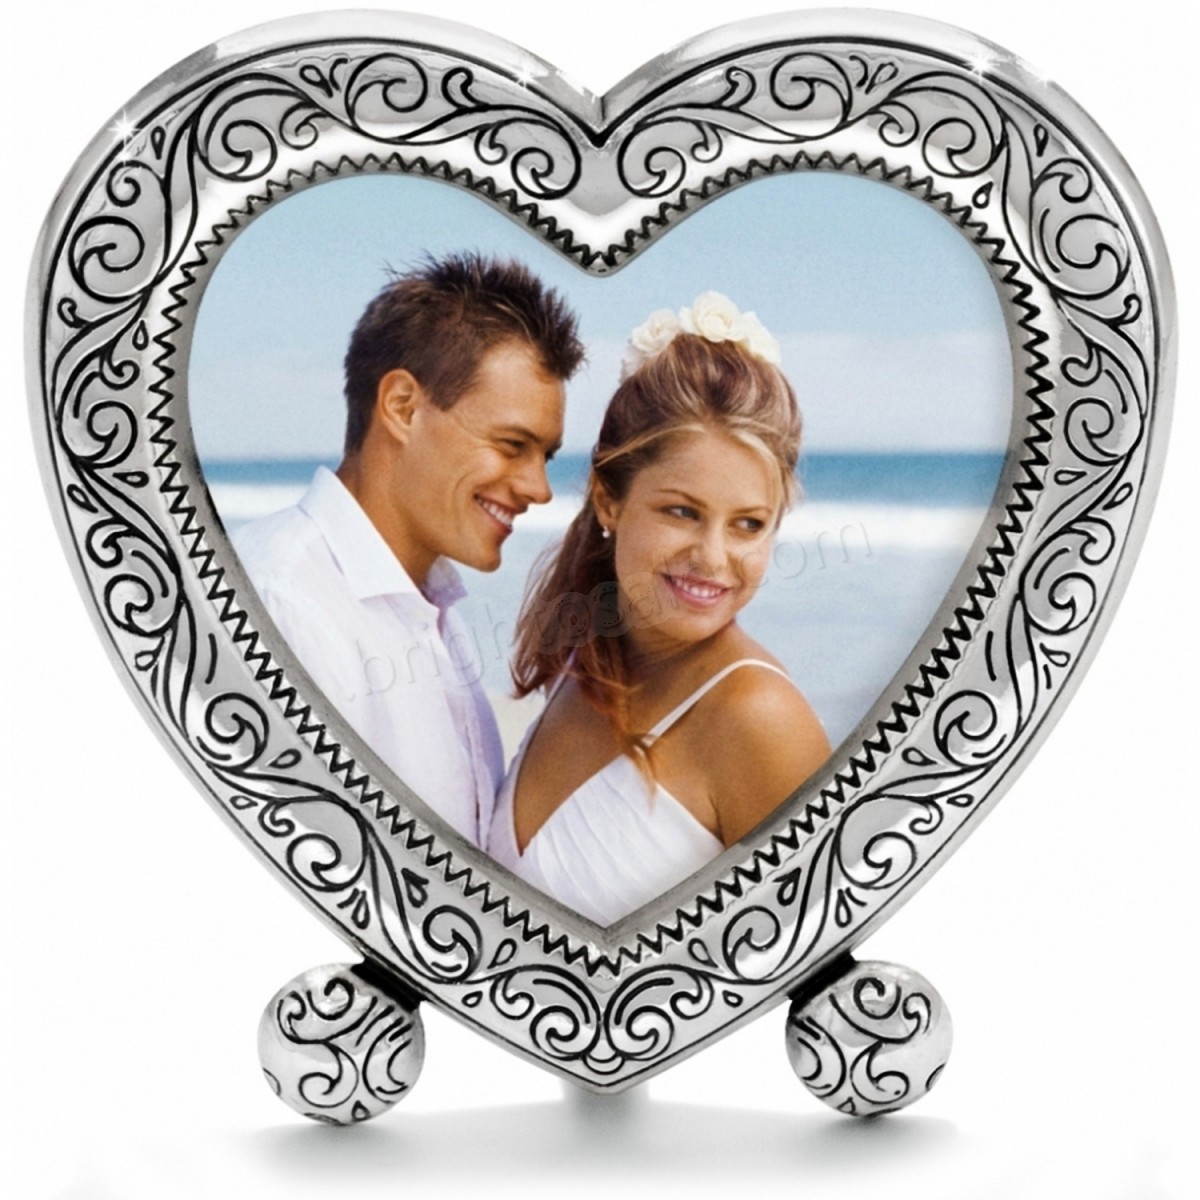 Brighton Collectibles & Online Discount Cupid's Kiss Charm - -0